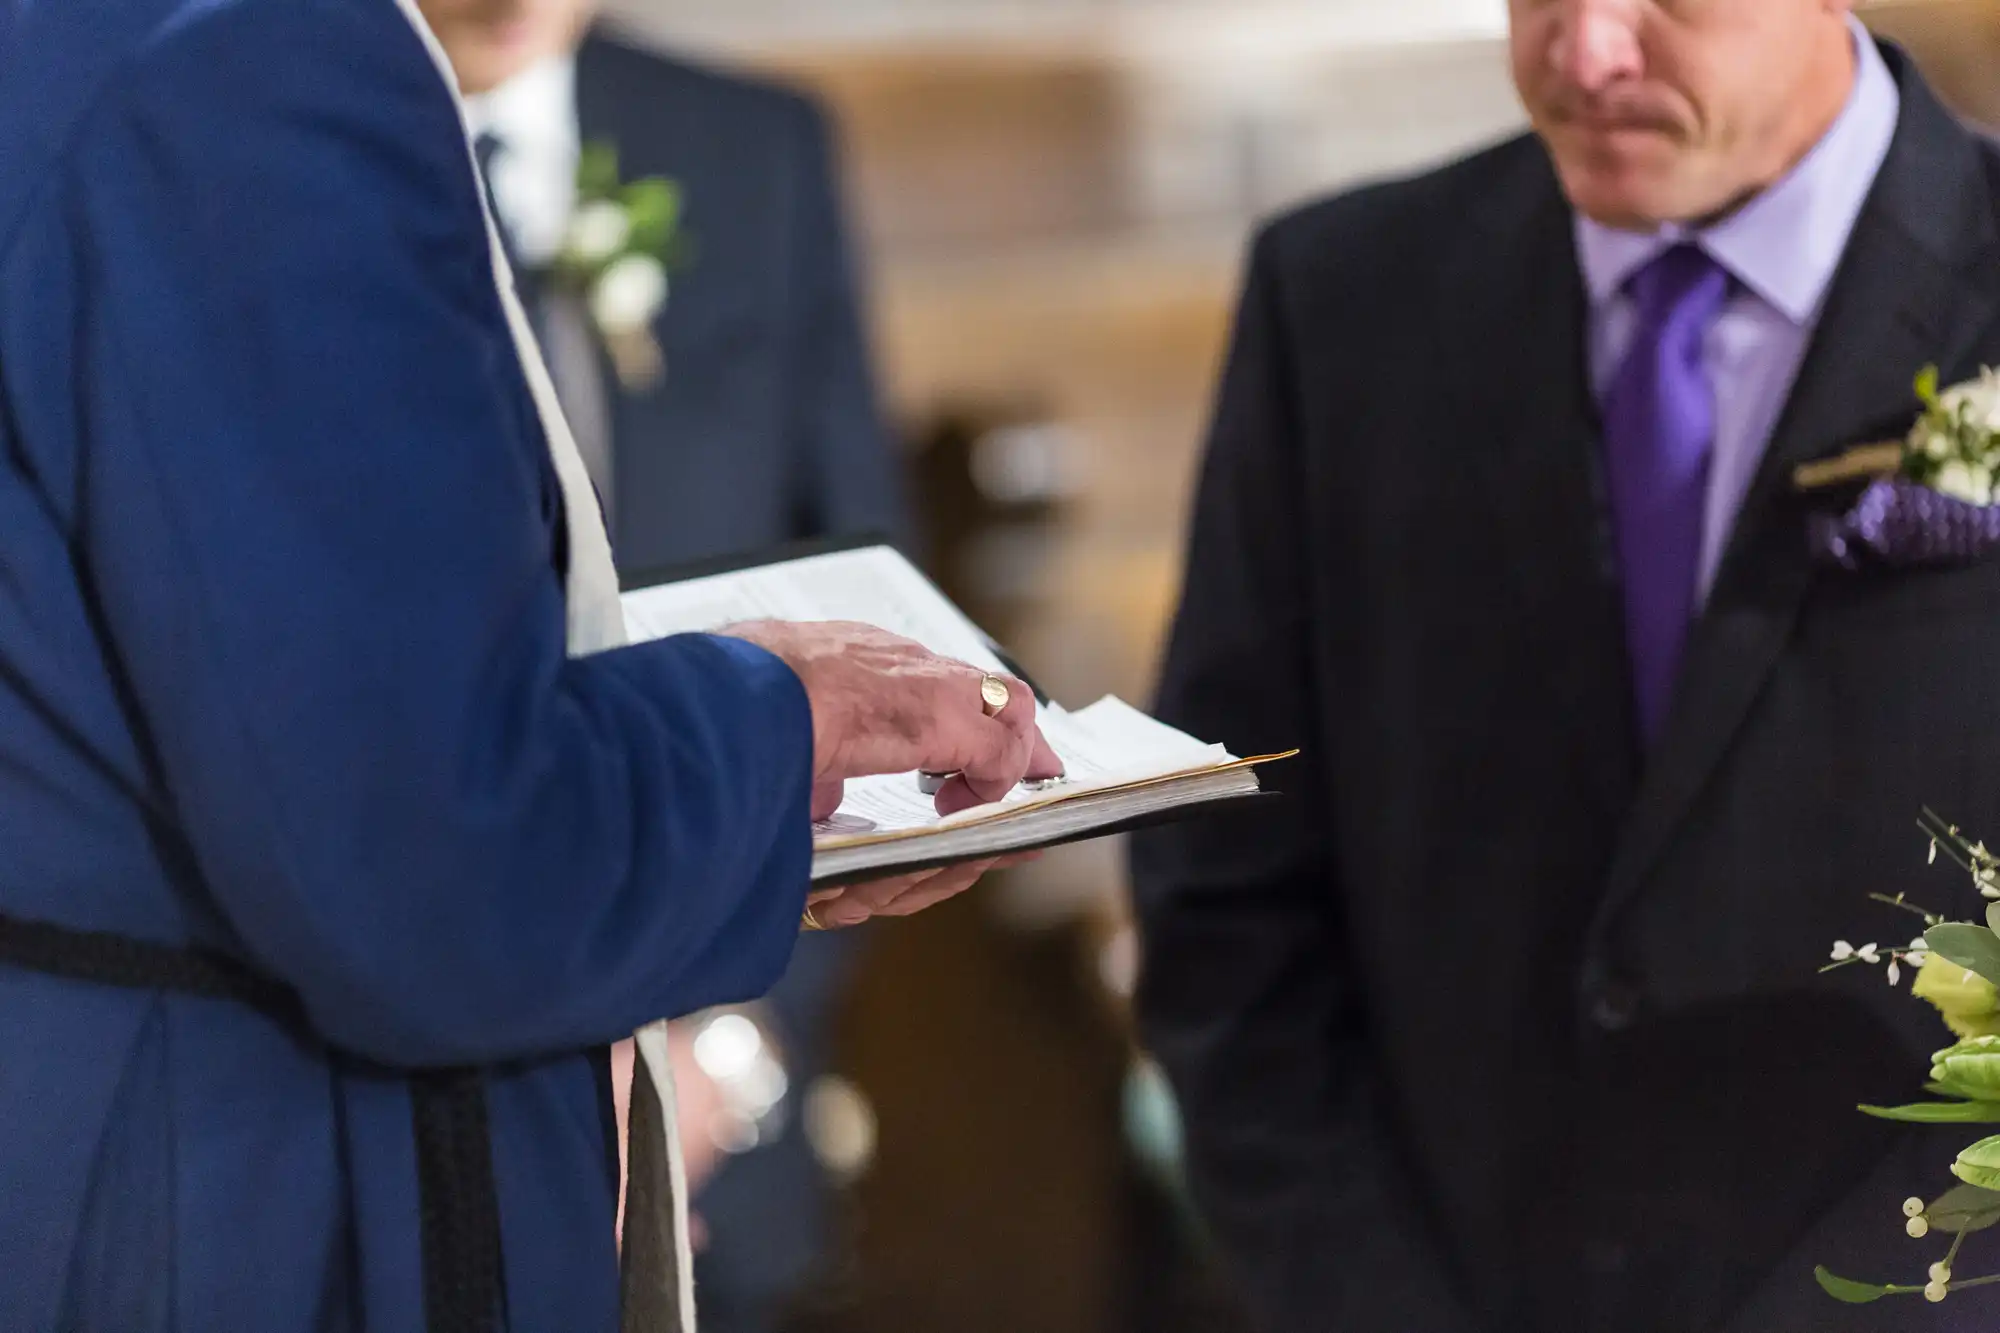 A bride and groom signing their marriage certificate, viewed close-up, with a focus on their hands and the pen.